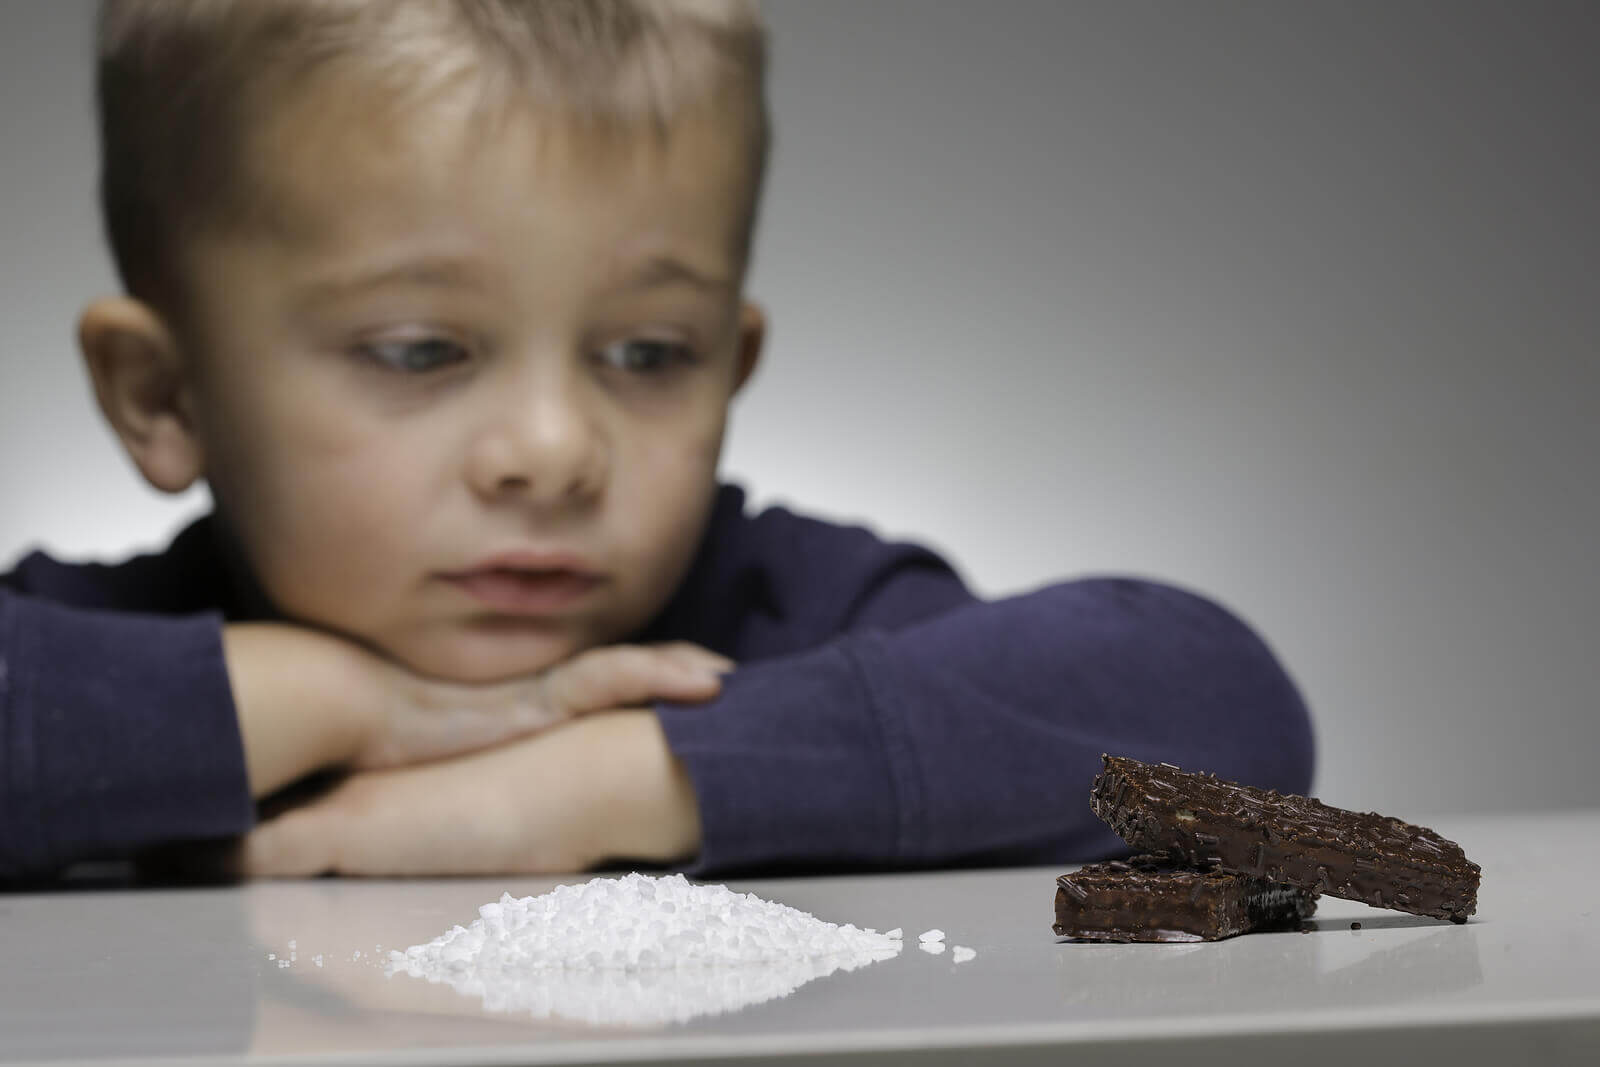 Artificial Sweeteners and Children